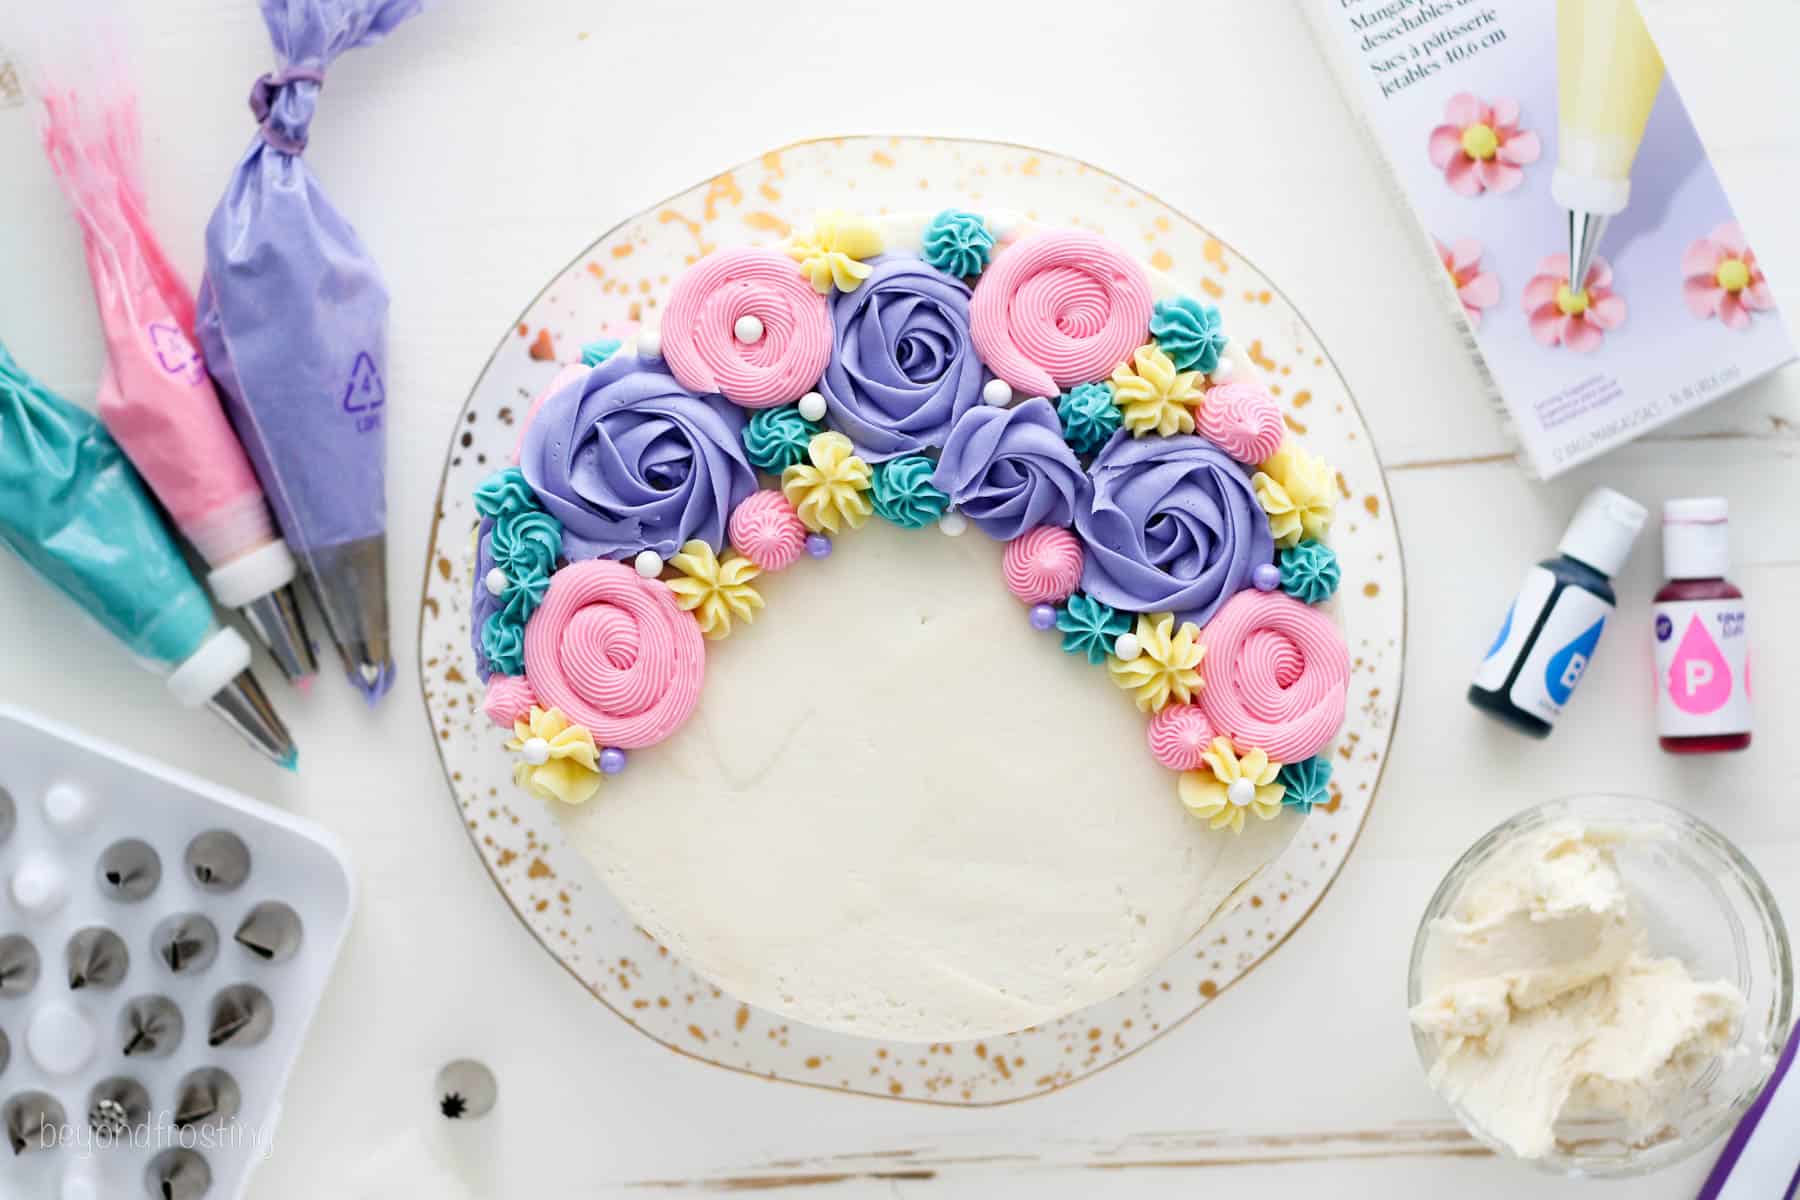 Overhead view of a white frosted cake decorated with various flowers piped in pink, blue, and purple buttercream.